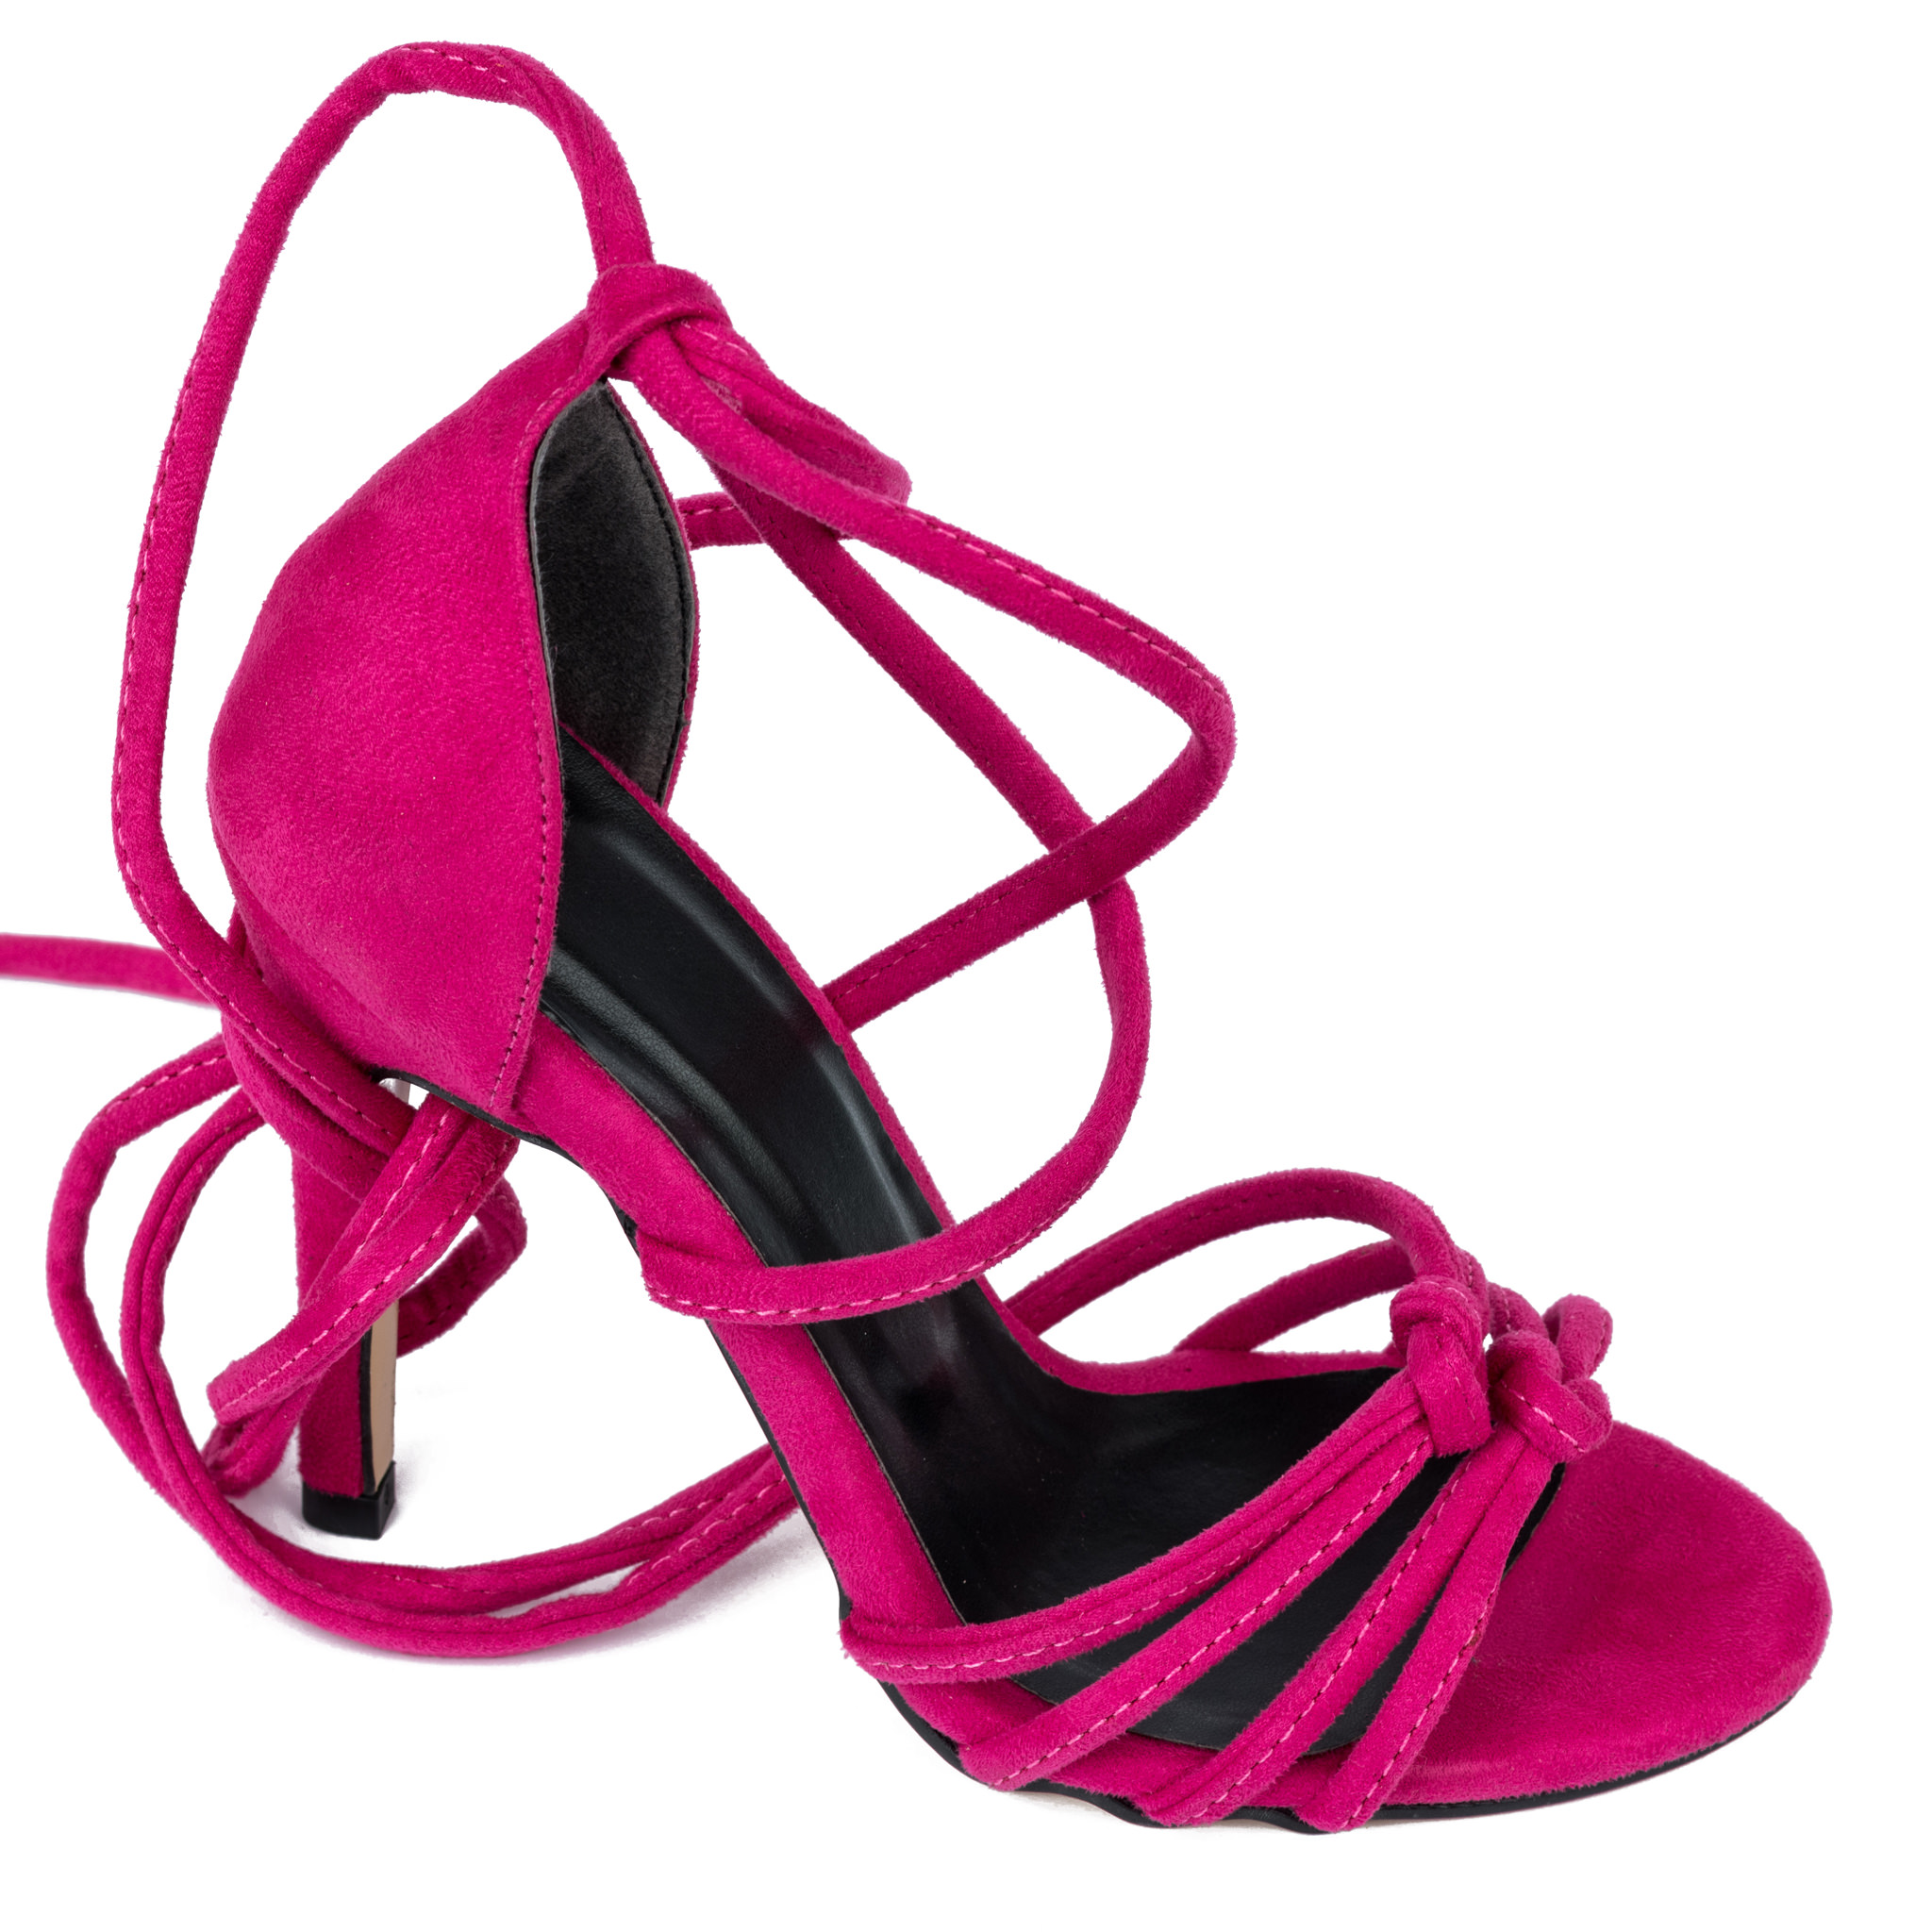 VELOUR LACE UP SANDALS WITH THIN HEEL - PINK